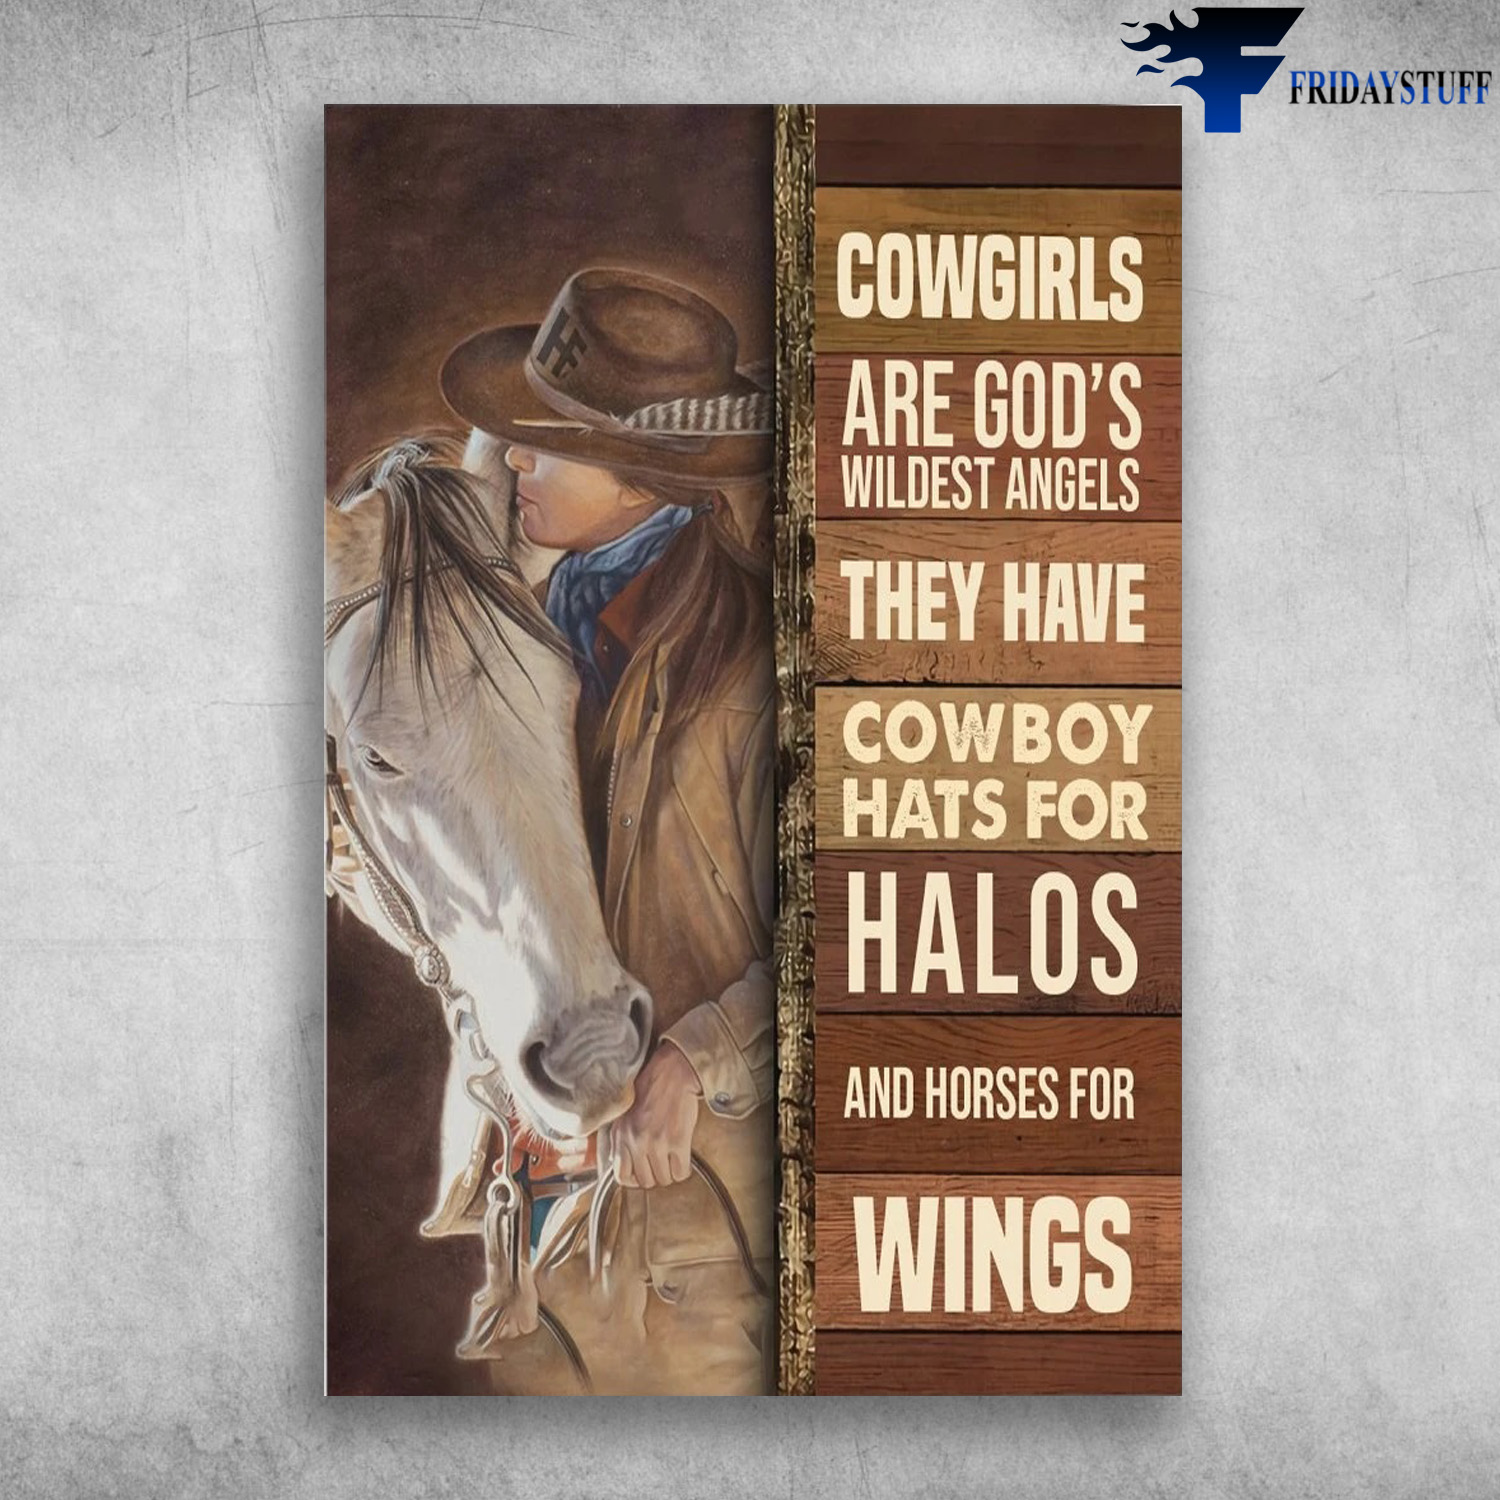 Cowgirl Angels - Cowgirls Are God's Wildest Angels, They Have Cowboy Hats For Halos And Horses For Wings